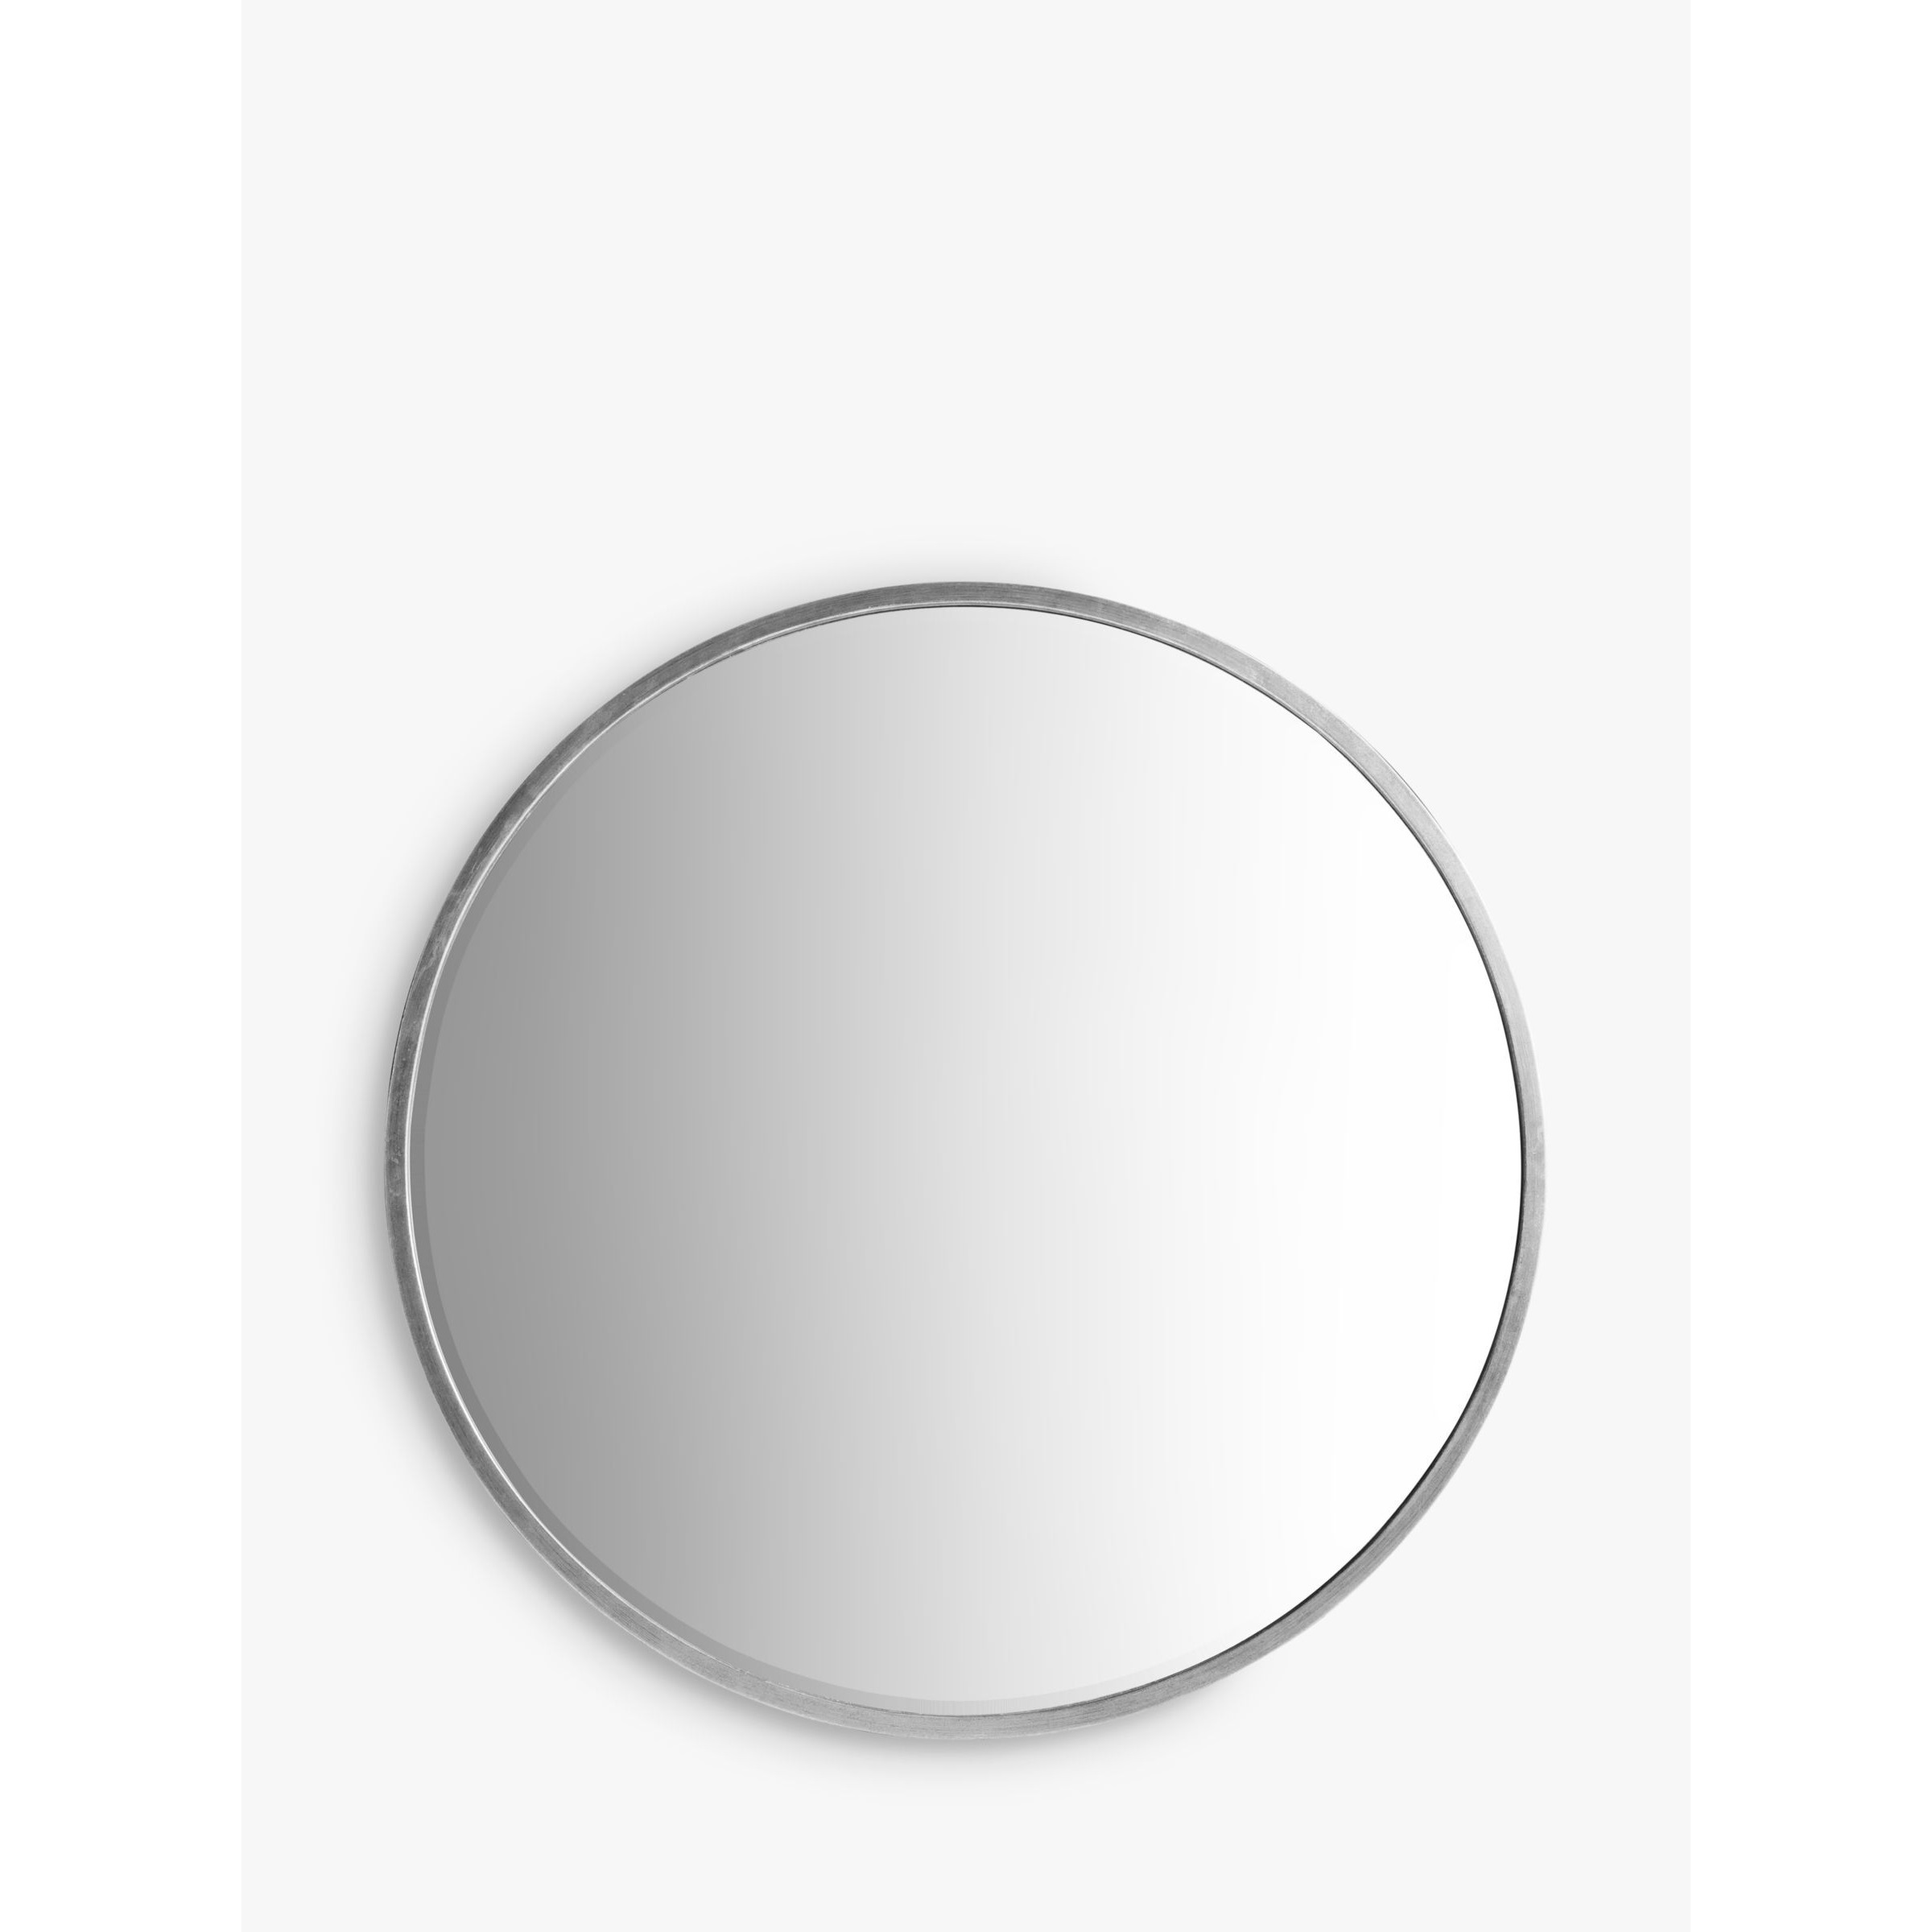 Gallery Direct Cade Round Wall Mirror - image 1